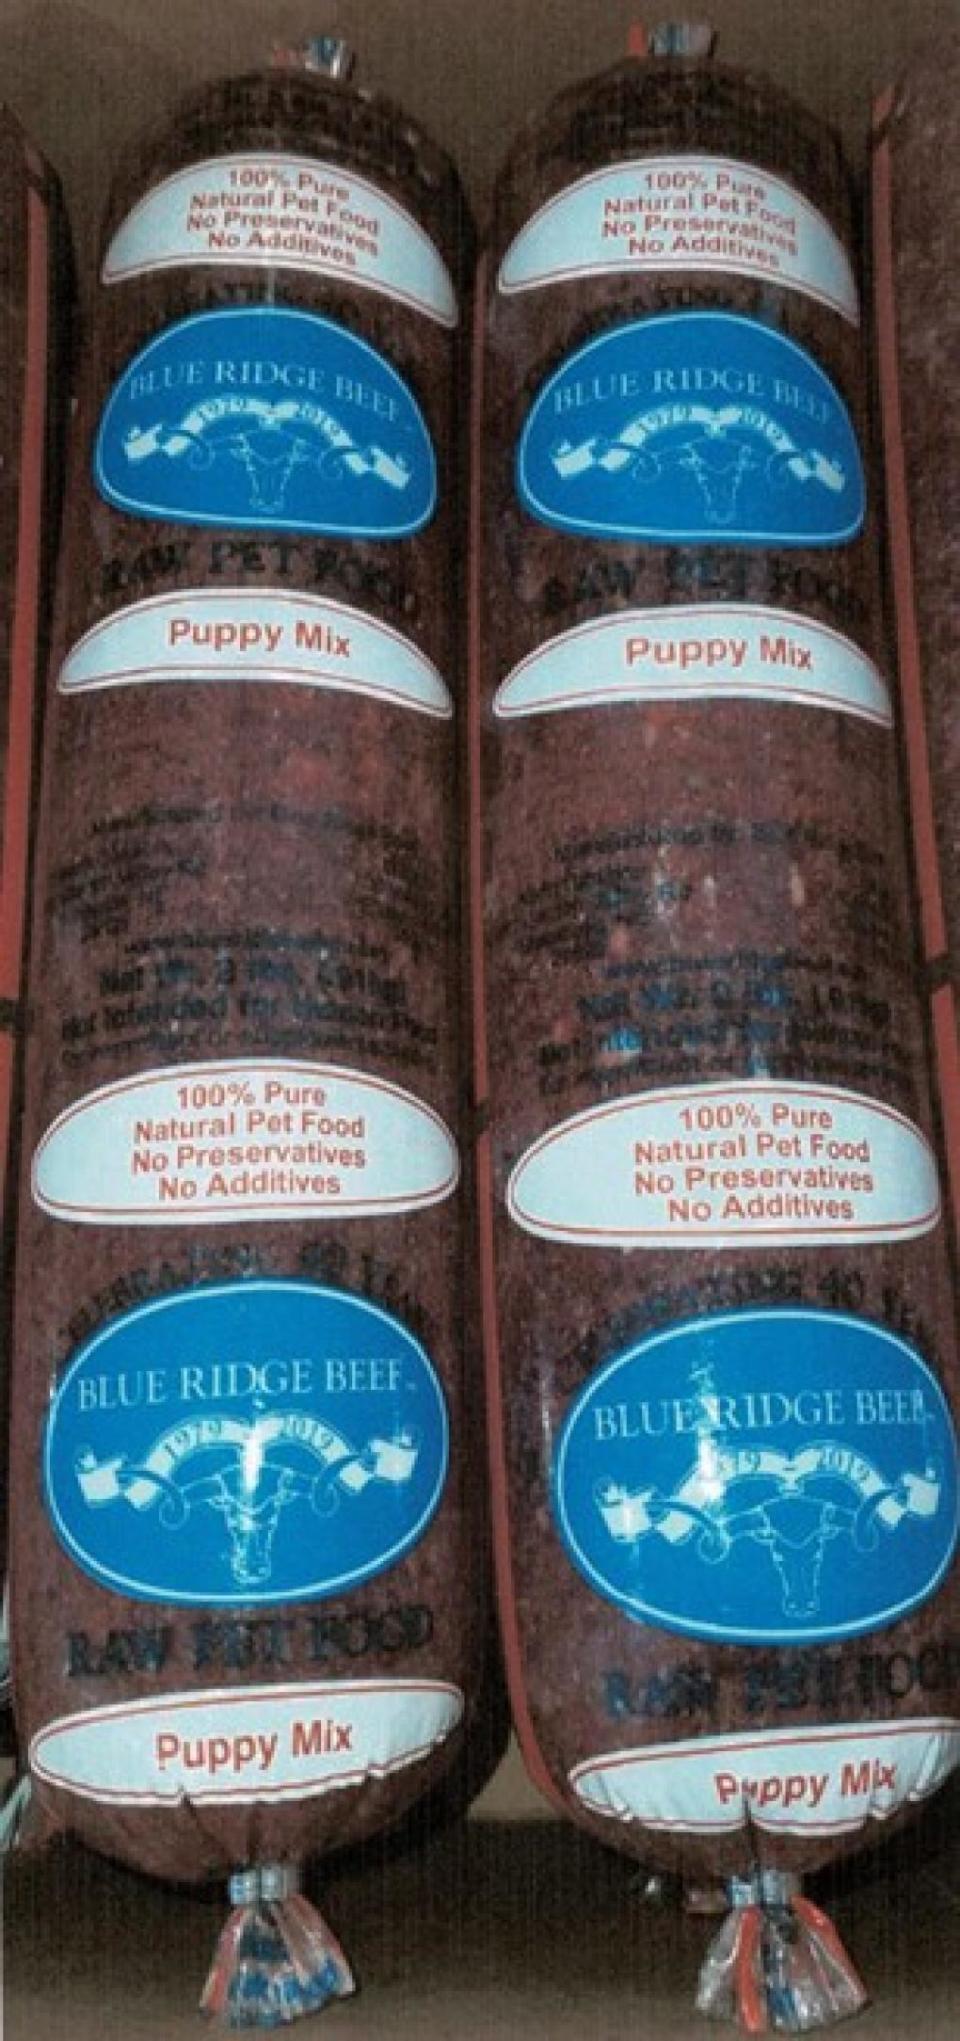 Pet food maker Blue Ridge Beef is recalling certain lots of its Puppy Mix and other pet foods because they may be contaminated with salmonella and listeria.